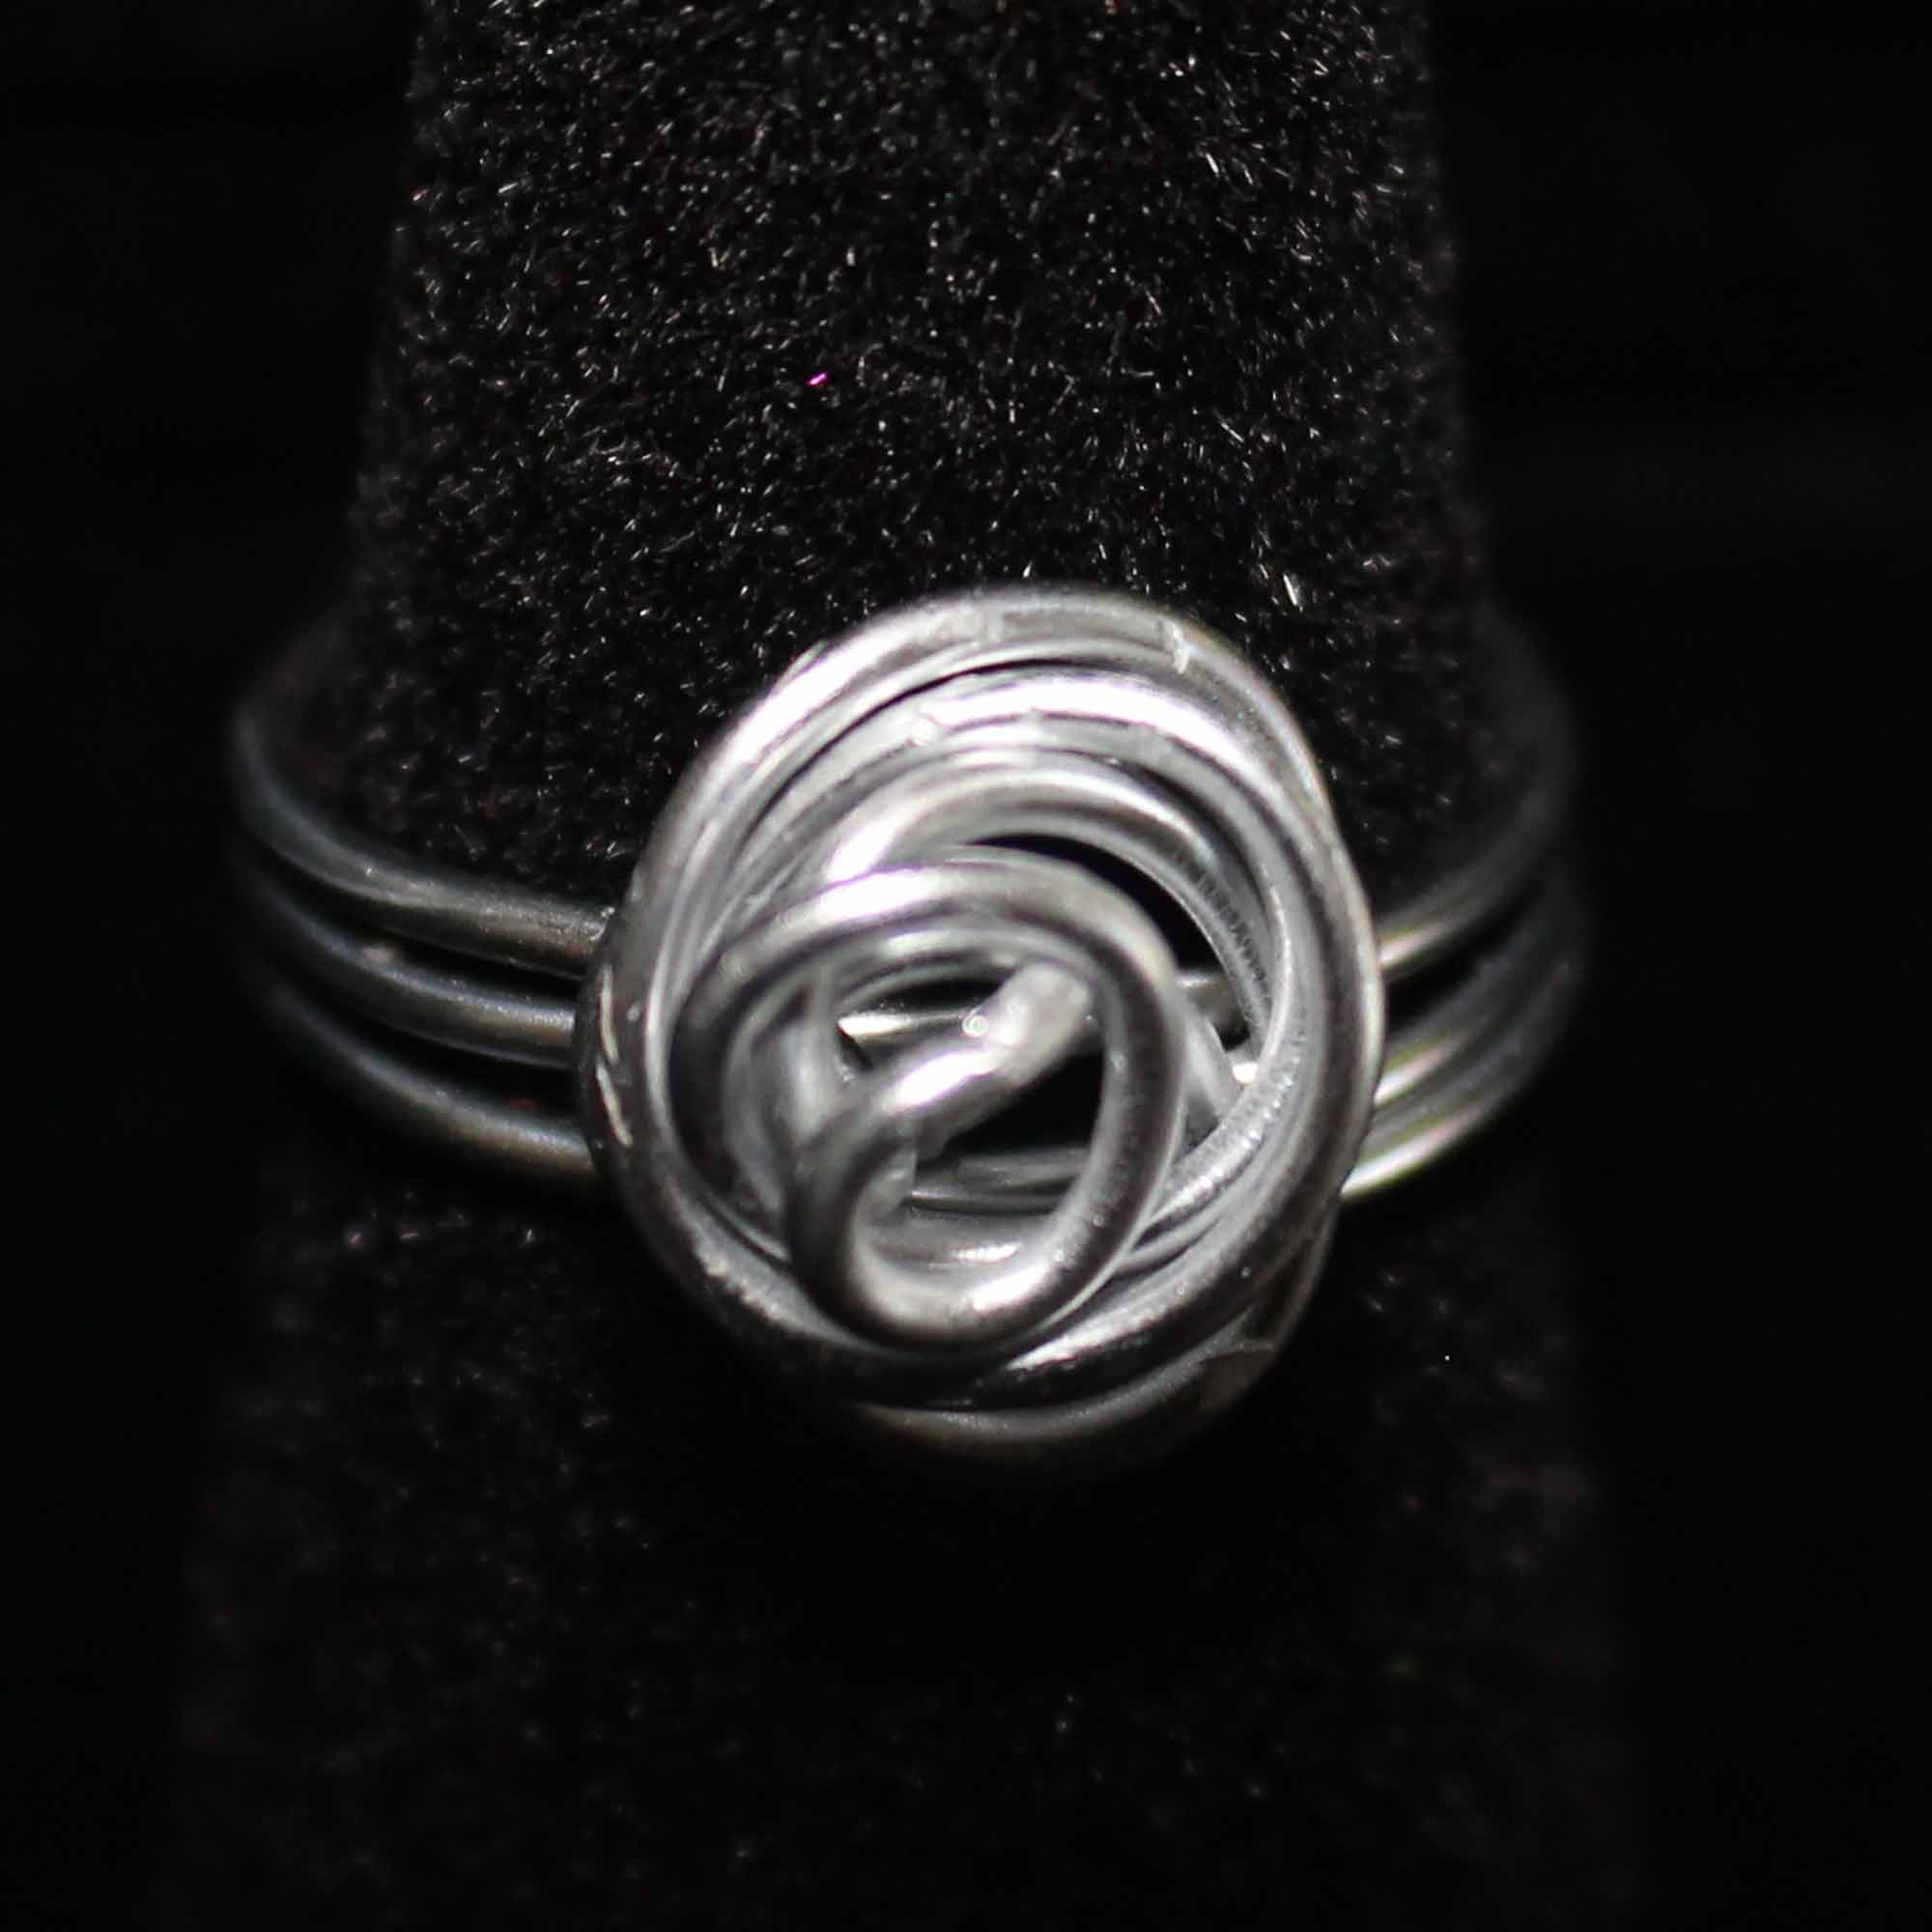 Rose Wire Ring